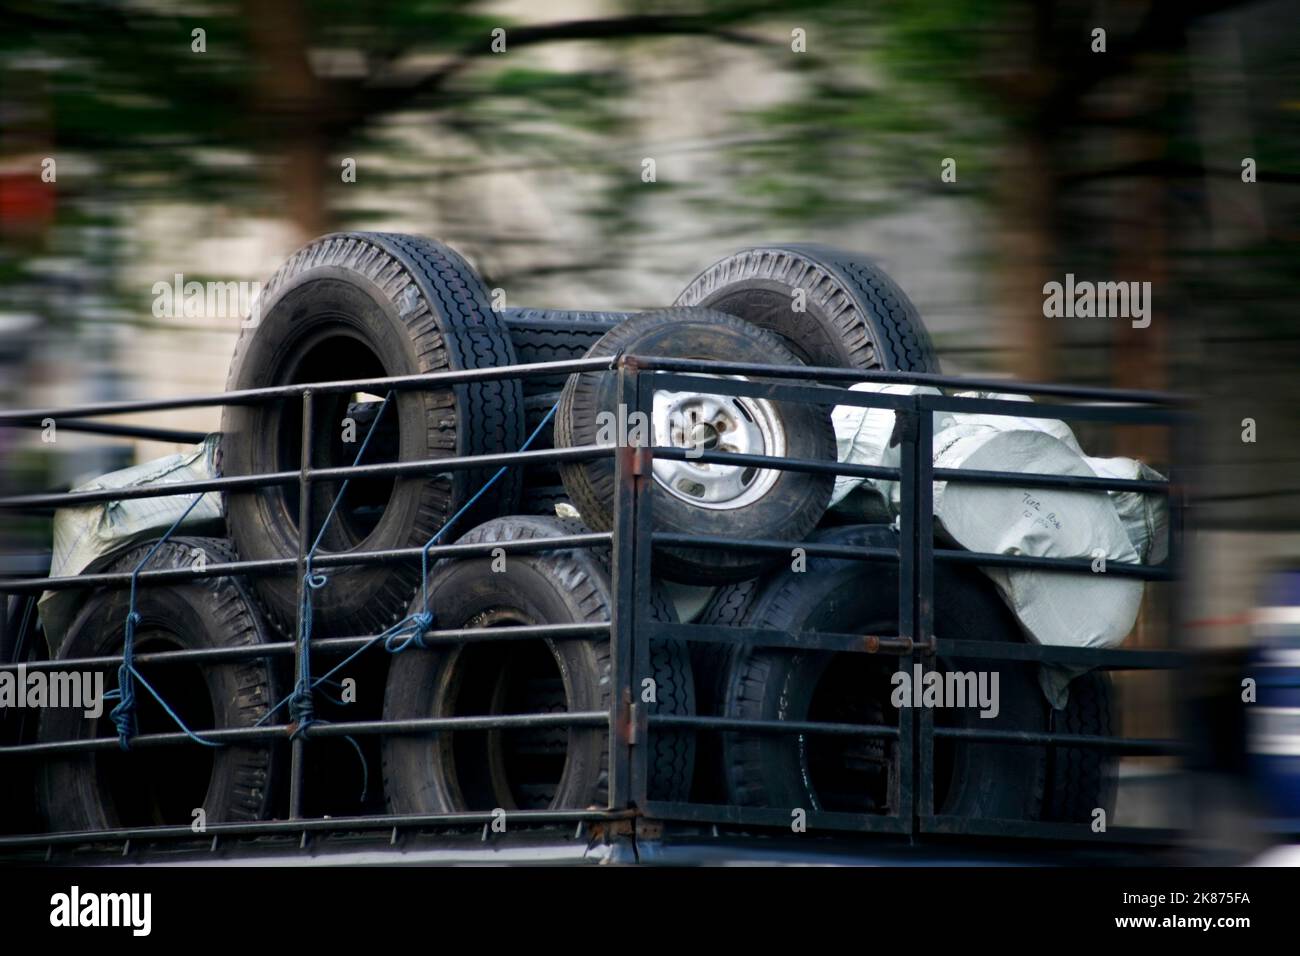 Stacks of tires in truck Stock Photo